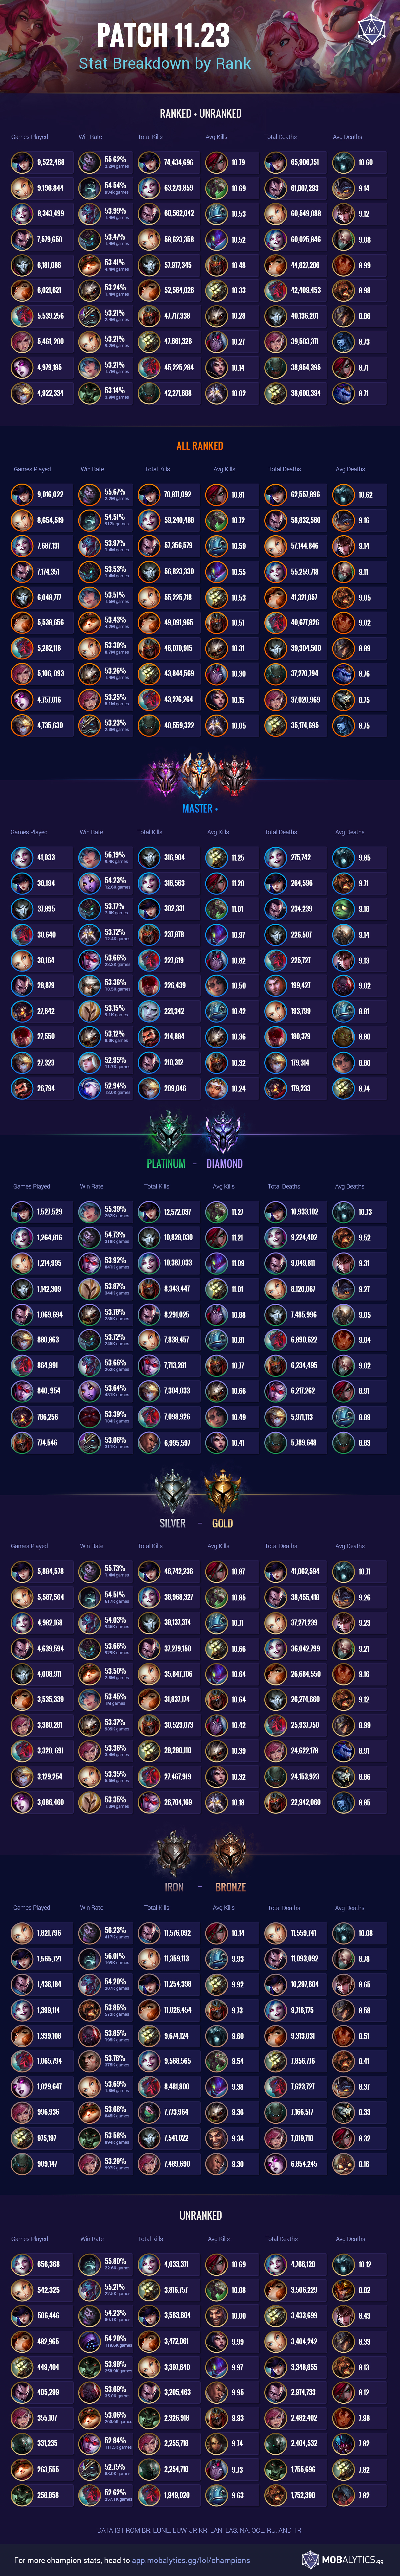 Patch 11.23 Rewind: Top 10 Champ Stats by Rank (Kills, Win Rate, Deaths, and More)